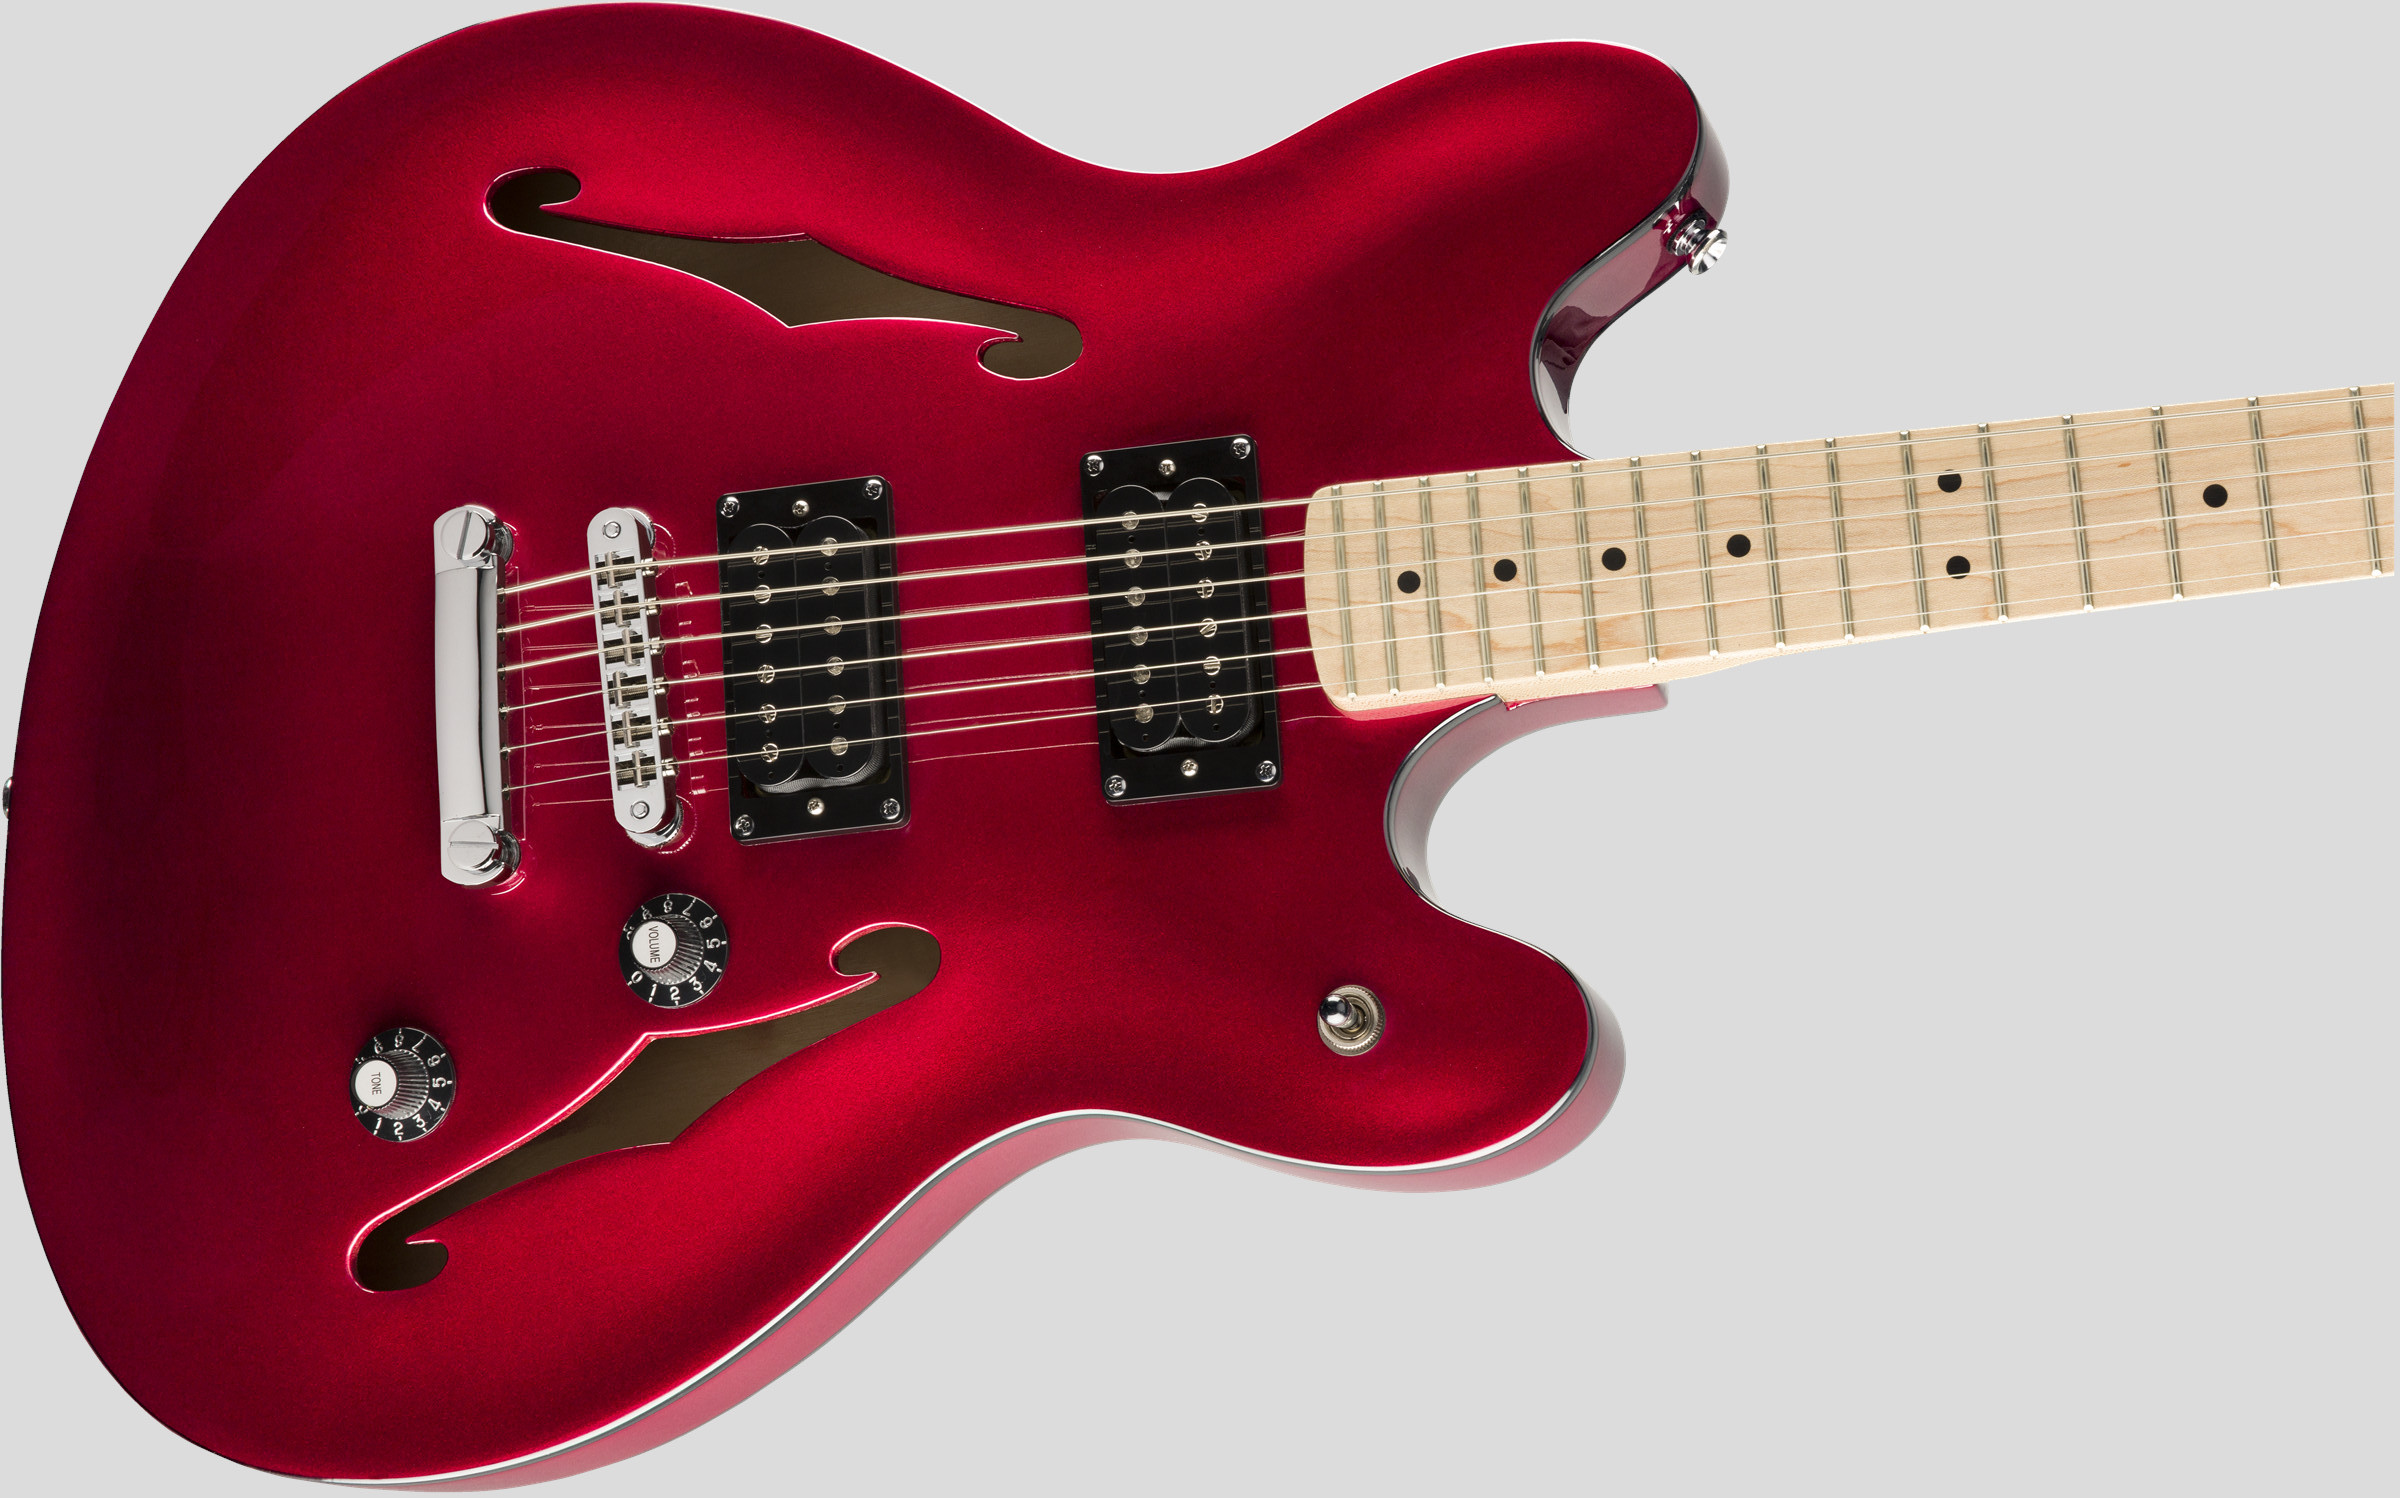 Squier by Fender Affinity Starcaster Candy Apple Red 3